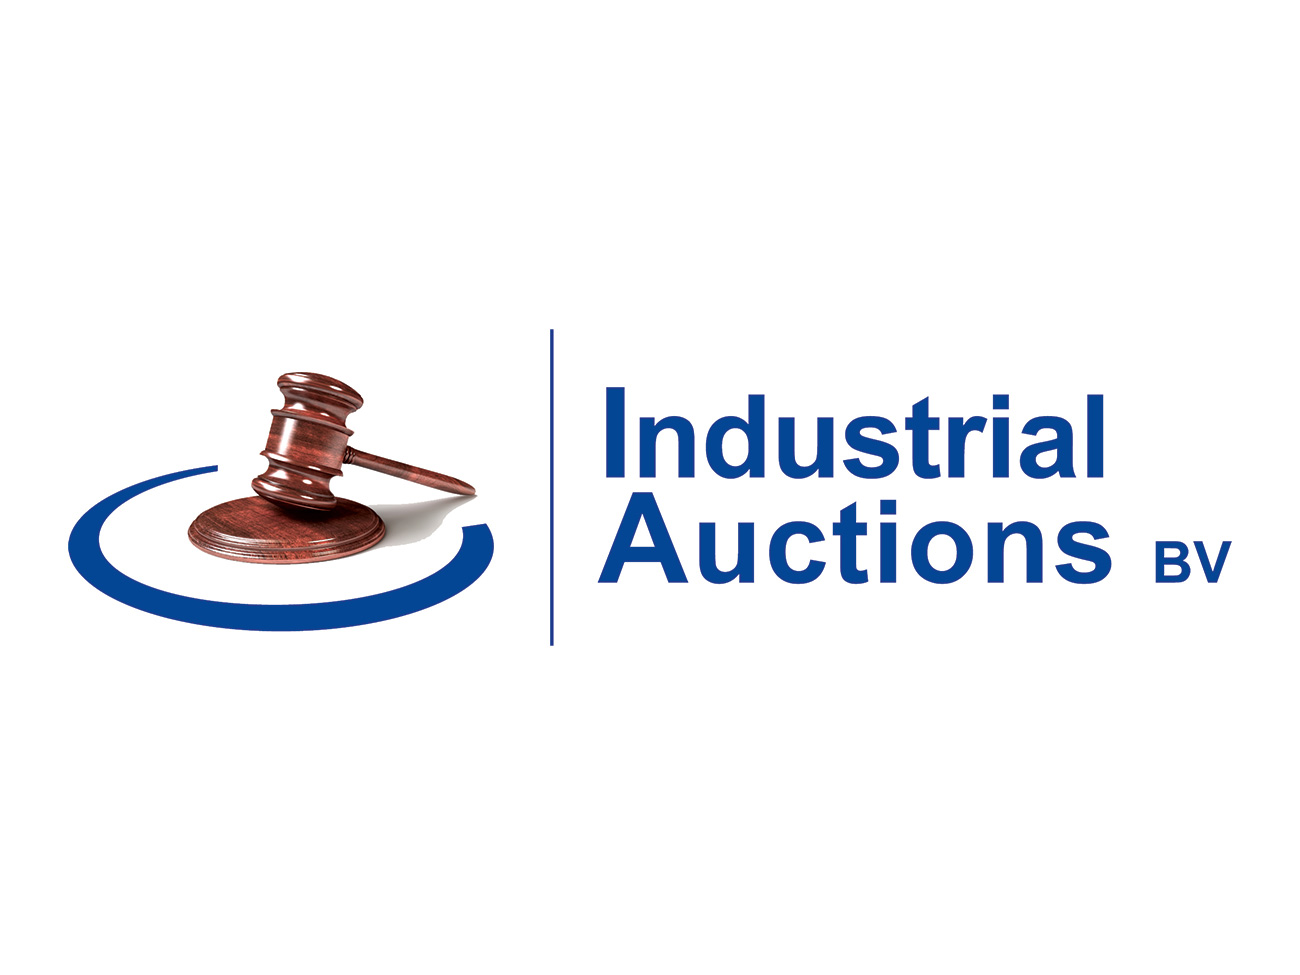 Industrial-Auctions-300-dpi[2]